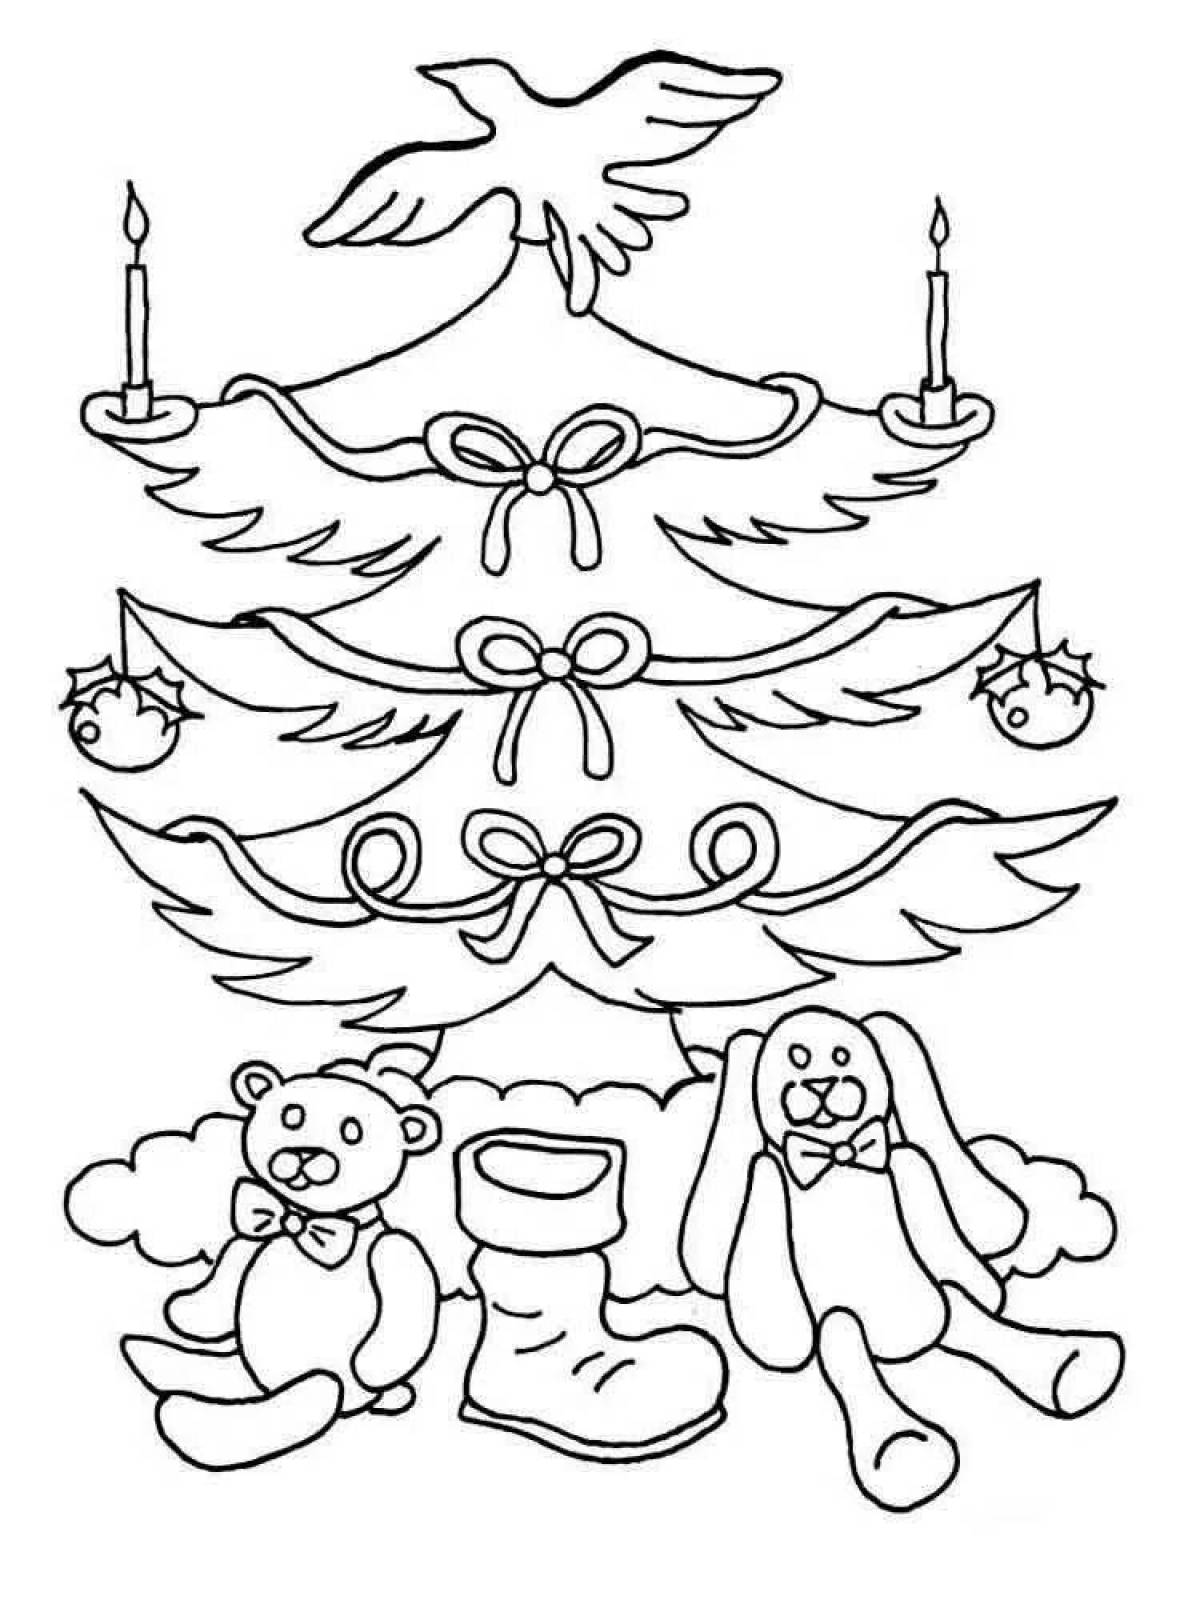 Glowing safe Christmas coloring book